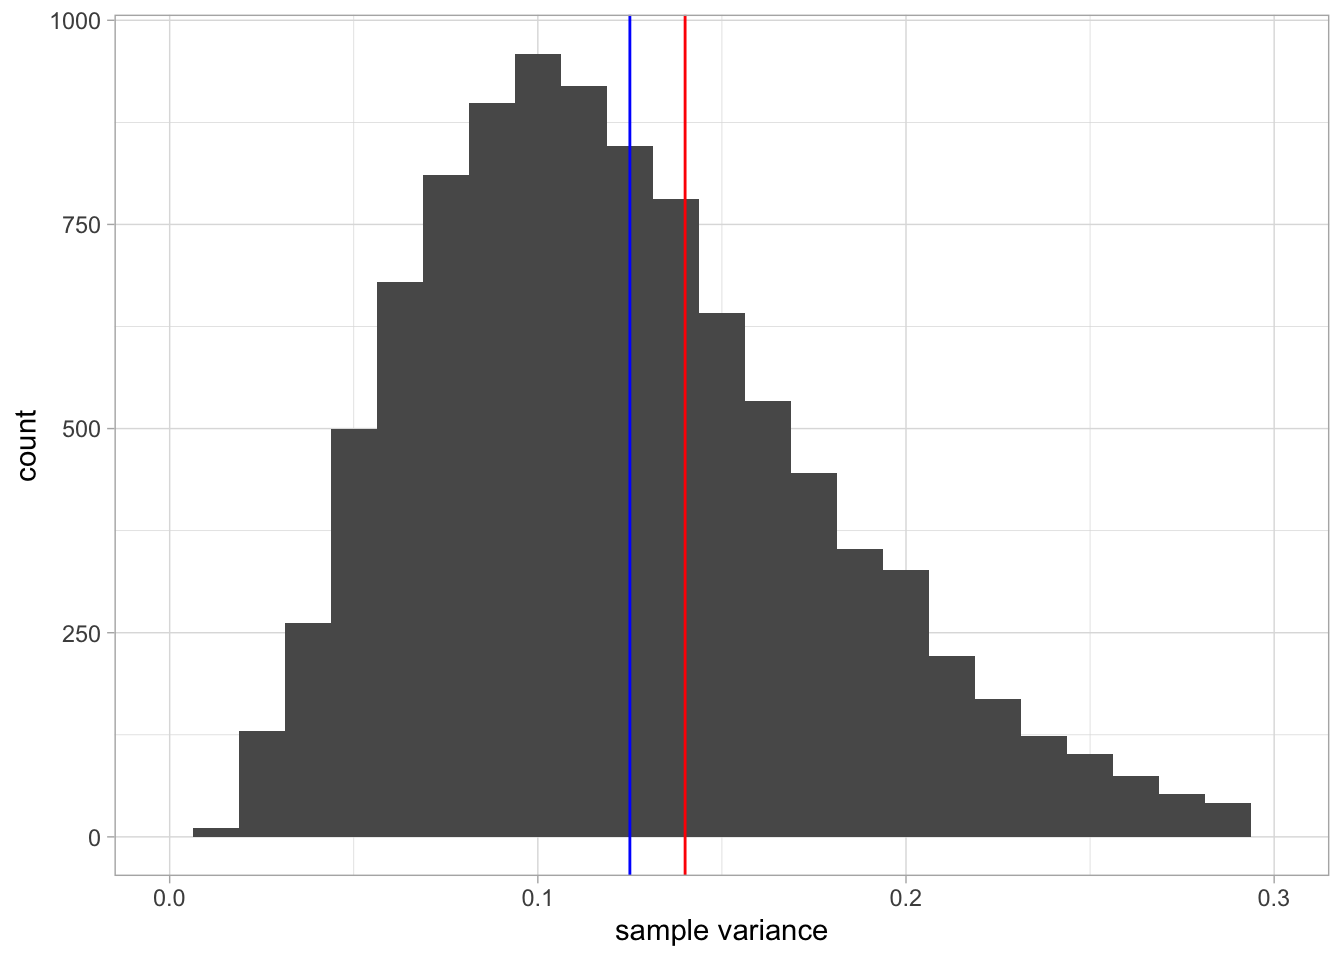 A histogram of 10,000 sample variances when the sample size equals 10. The red line indicates the population variance. The blue line indicates the mean of all variances observed in the 10,000 samples.